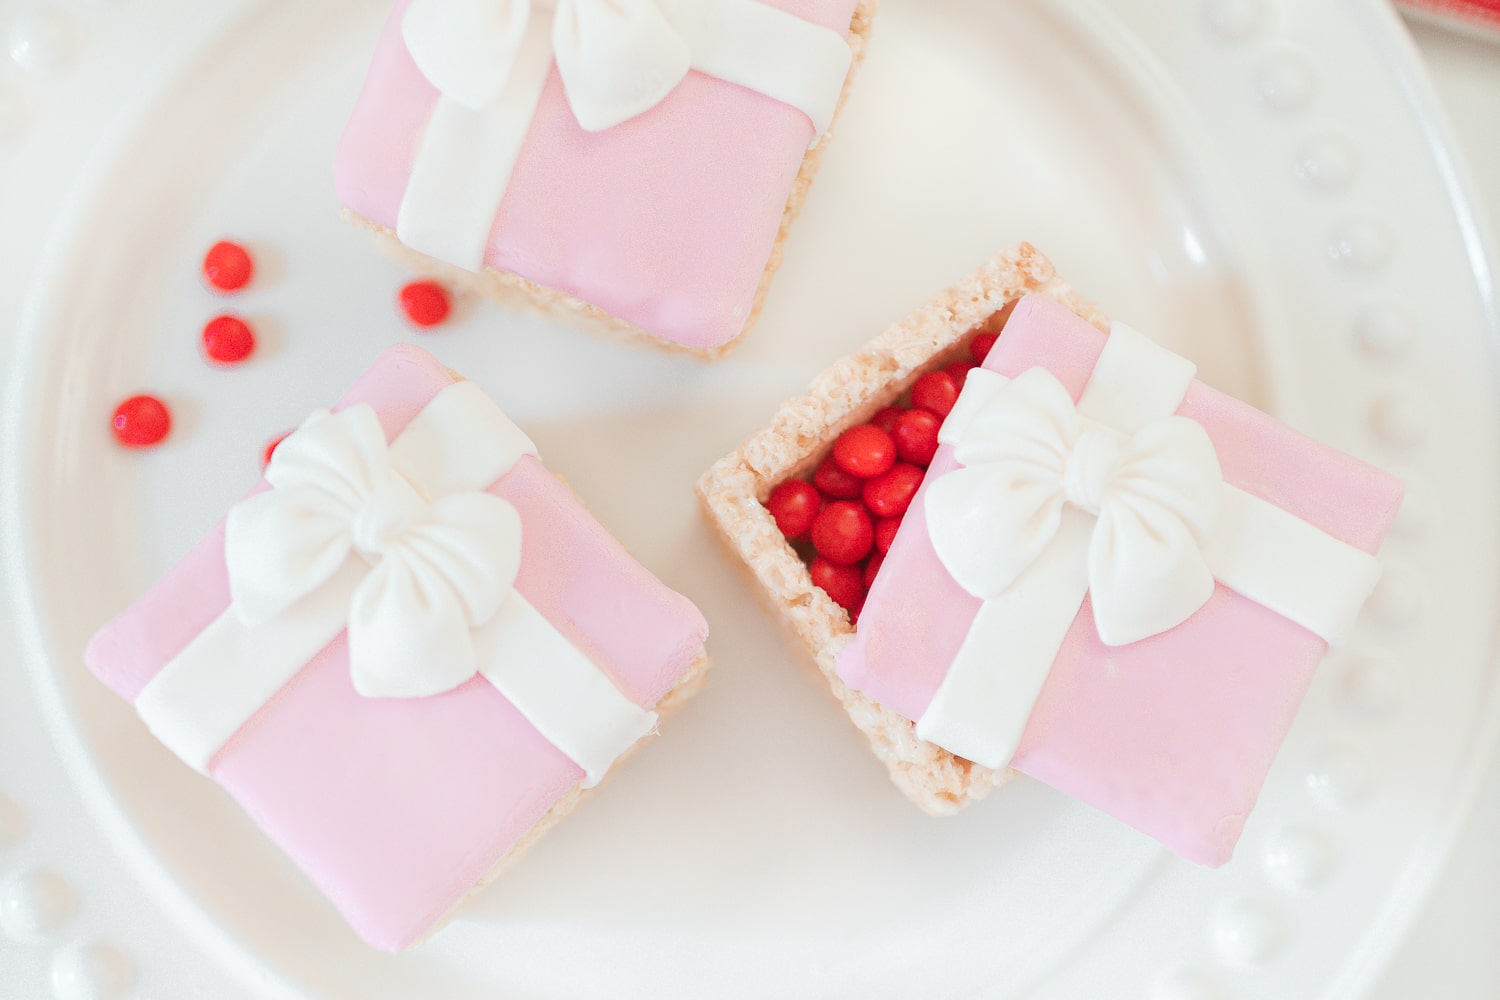 Pink rice krispie treats gift boxes stuffed with cinnamon Imperials and created by southern lifestyle blogger Stephanie Ziajka on Diary of a Debutante